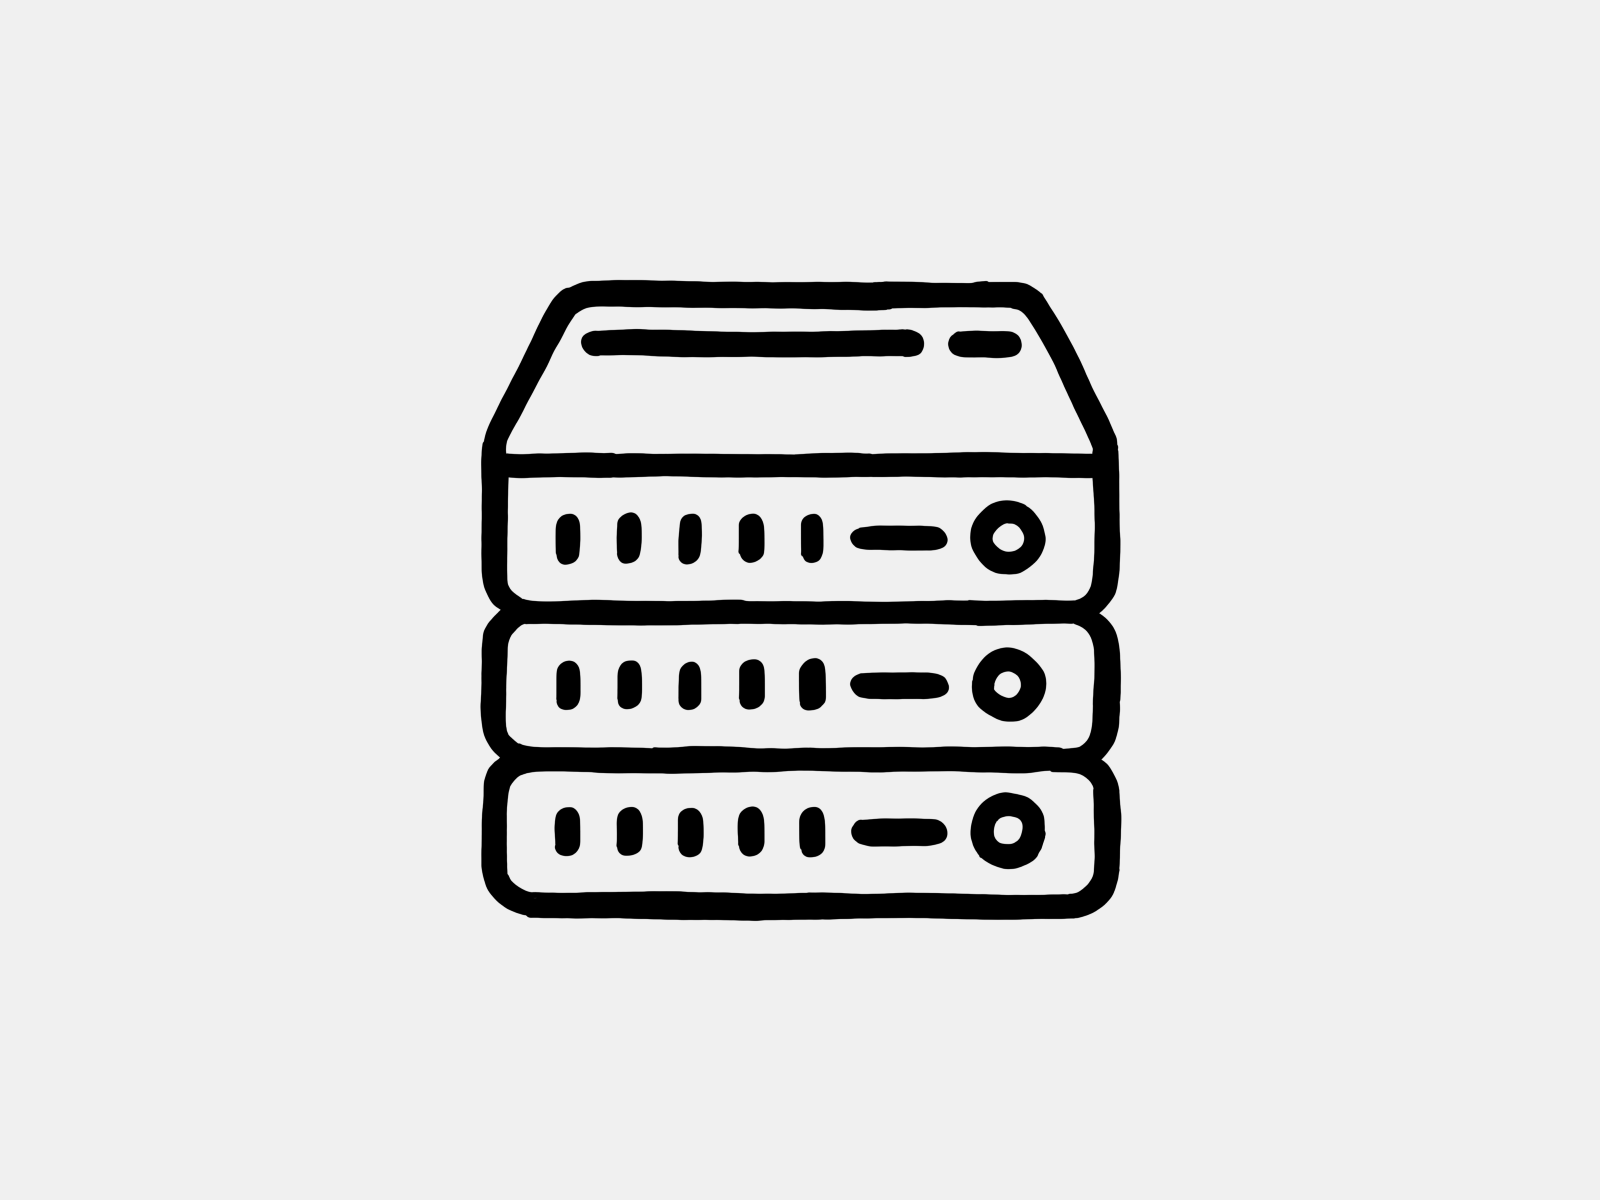 An illustration of a server icon.